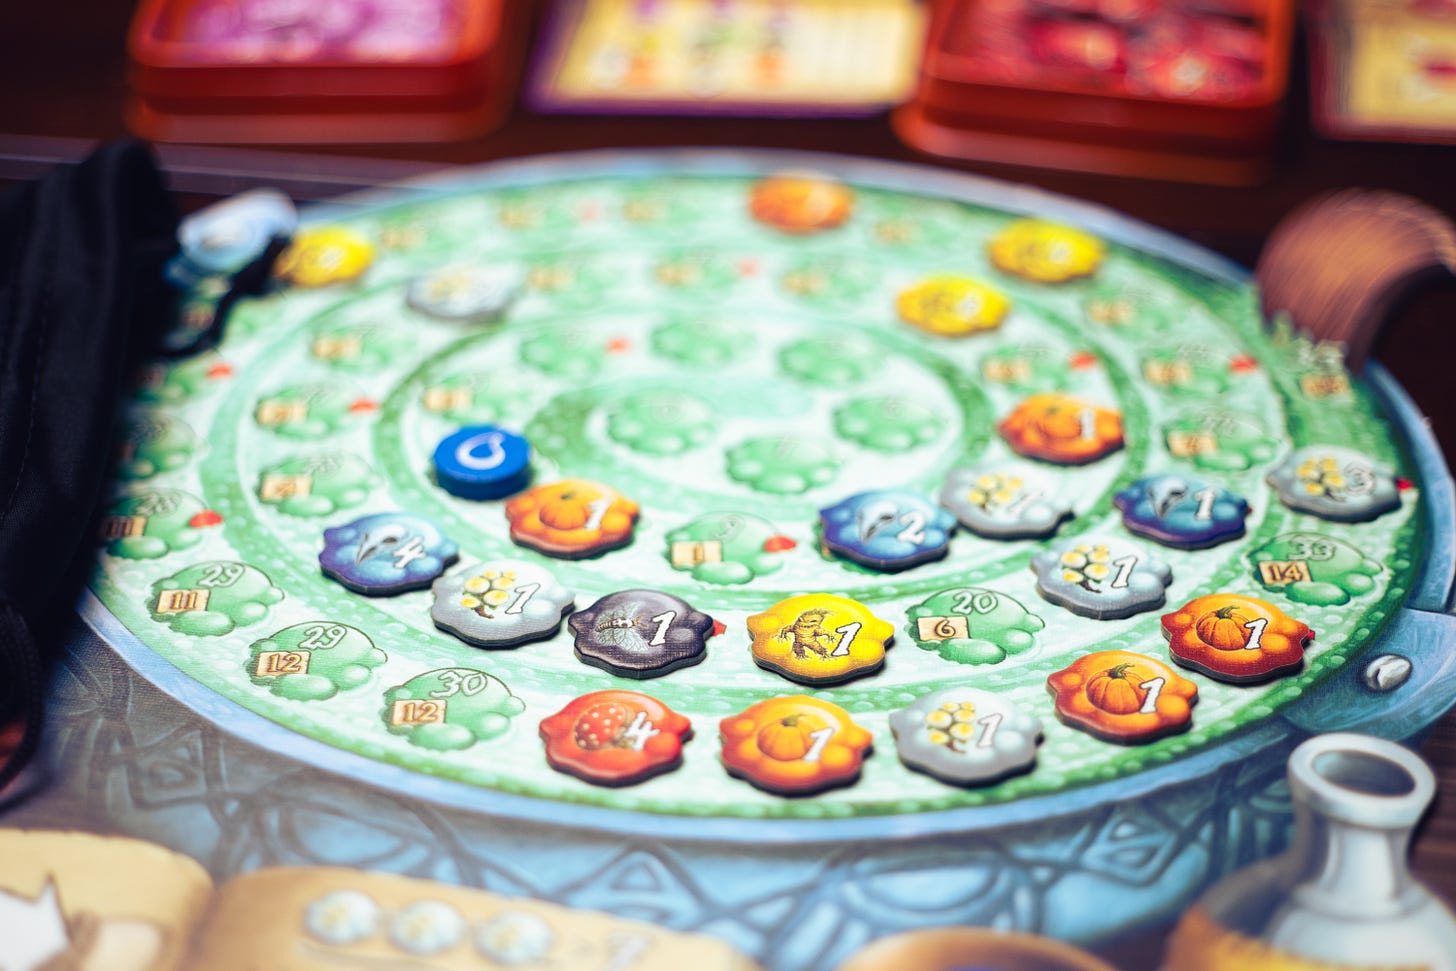 The board game The Quacks of Quedlinburg on a table. The player board, shaped like a cauldron, features many pieces placed in a spiral on the board.